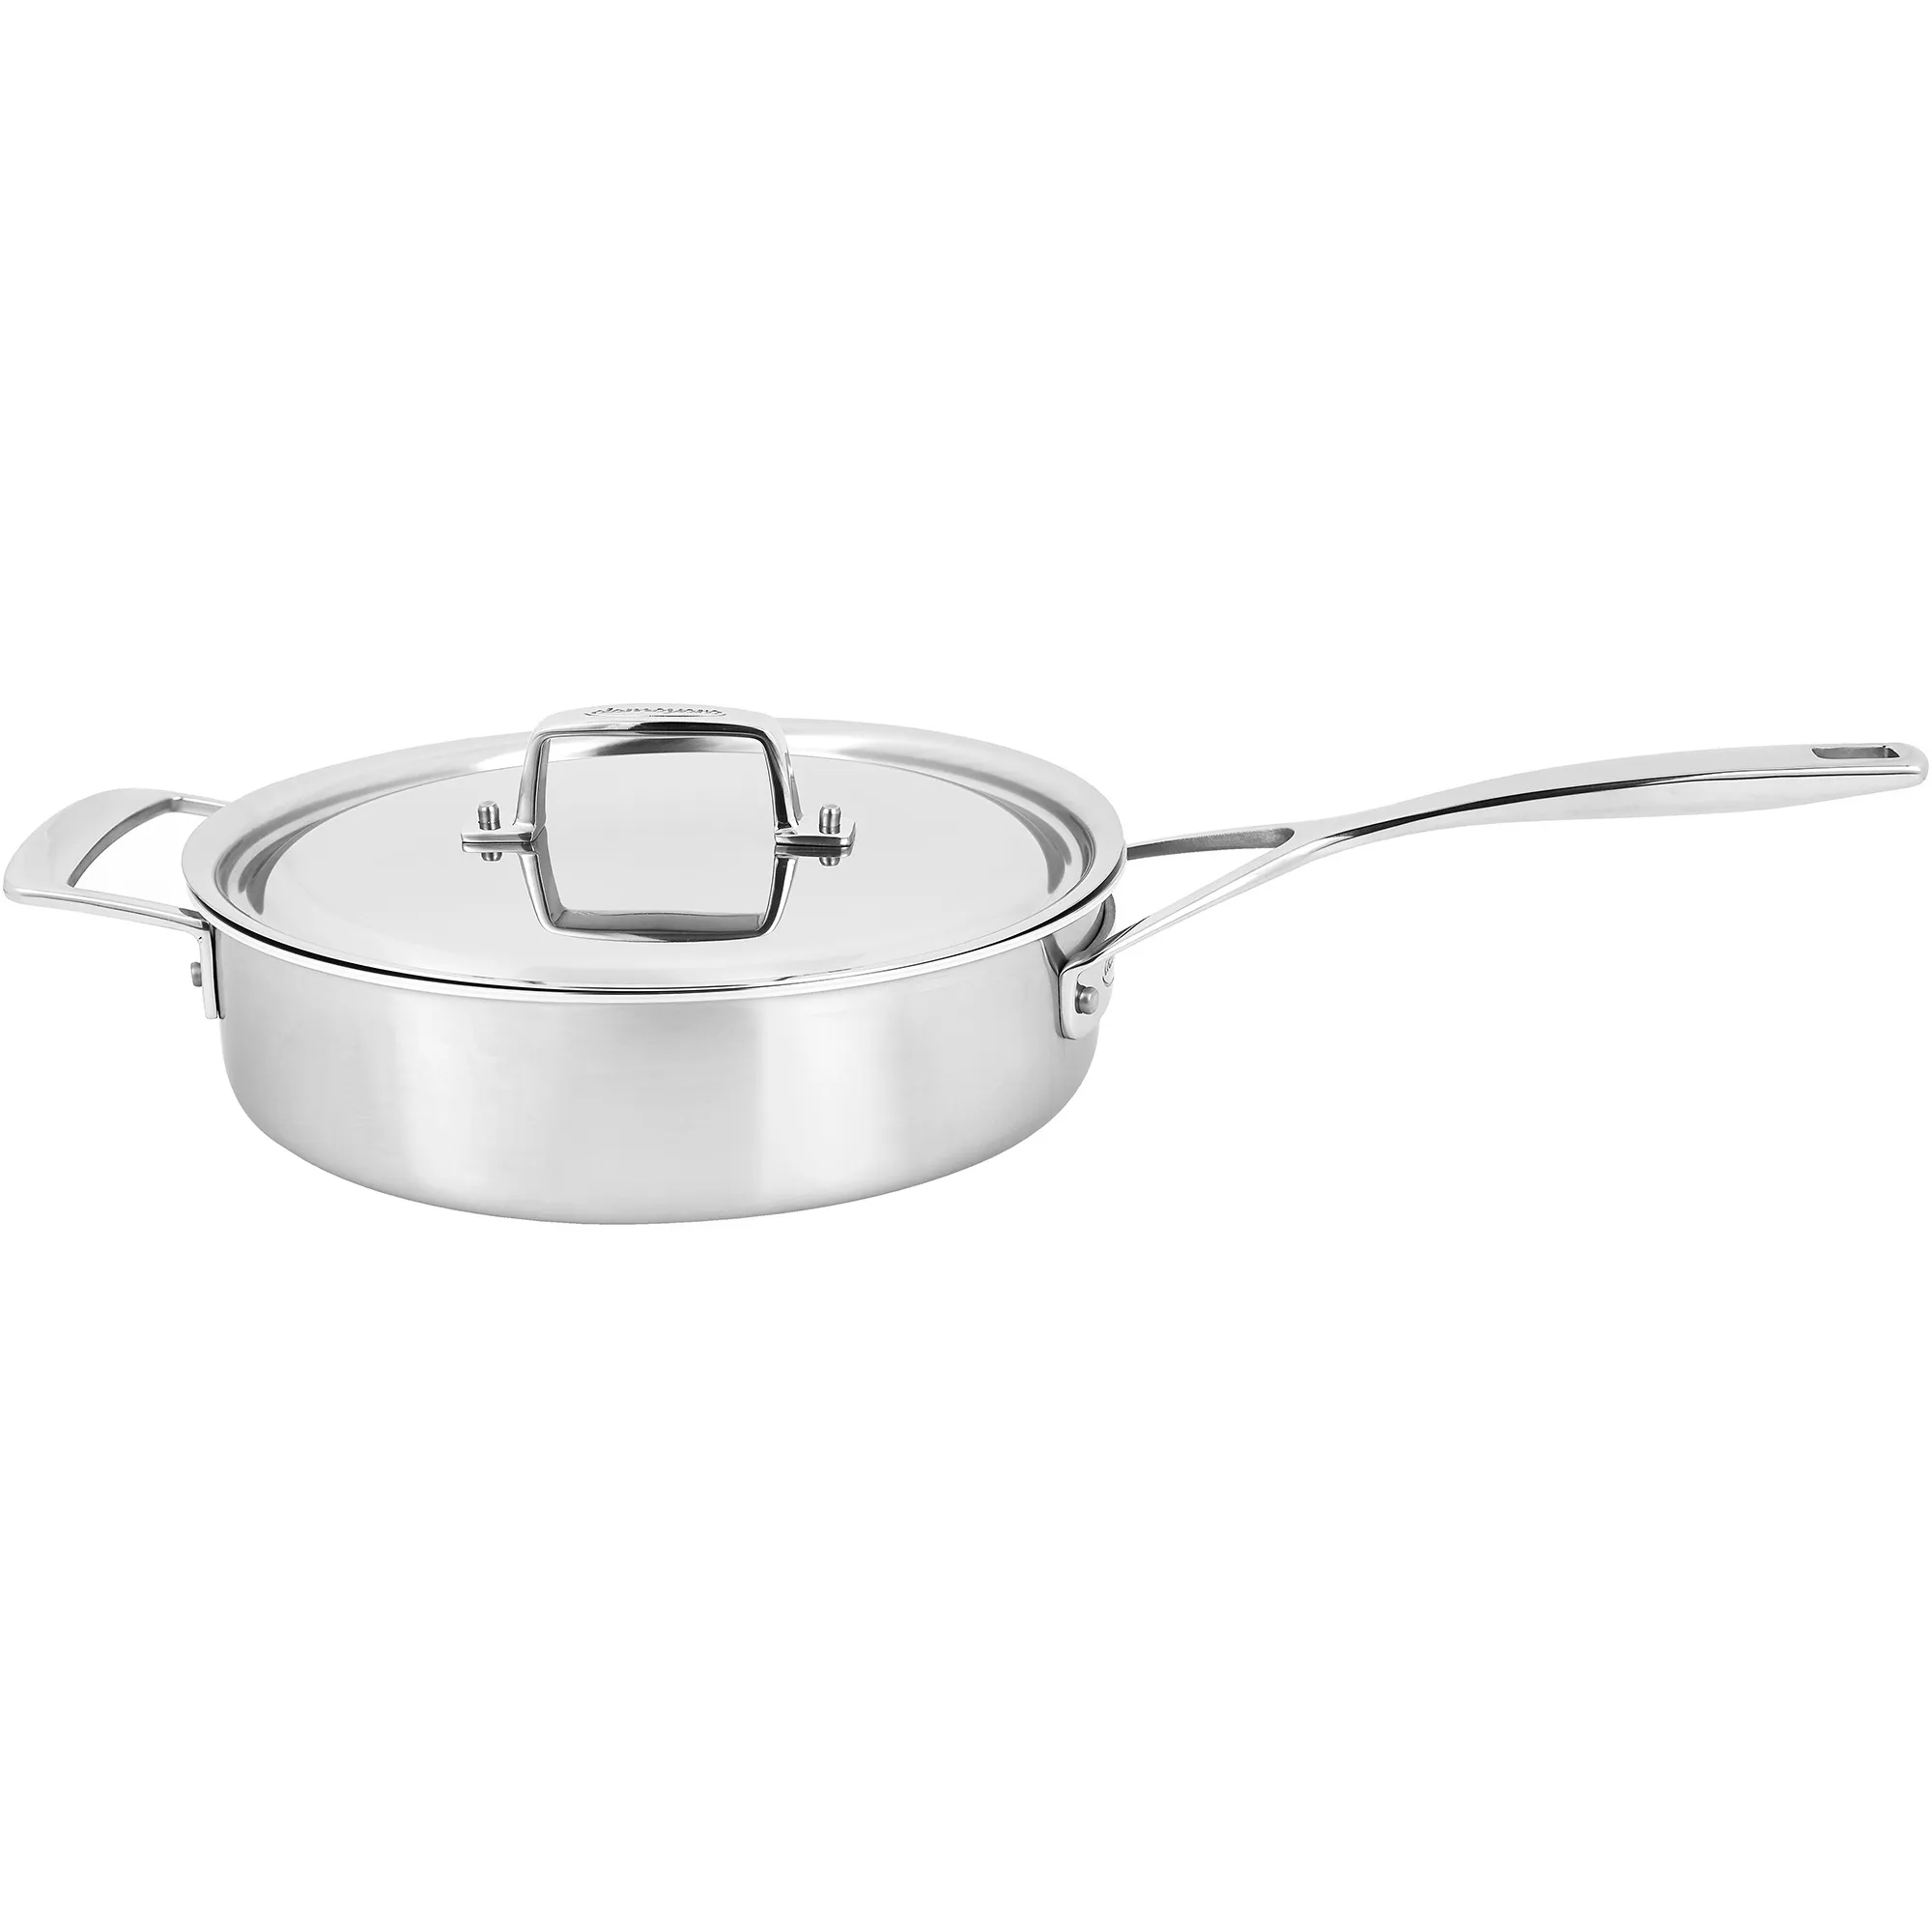  Demeyere Industry 5-Ply 1.5-qt Stainless Steel